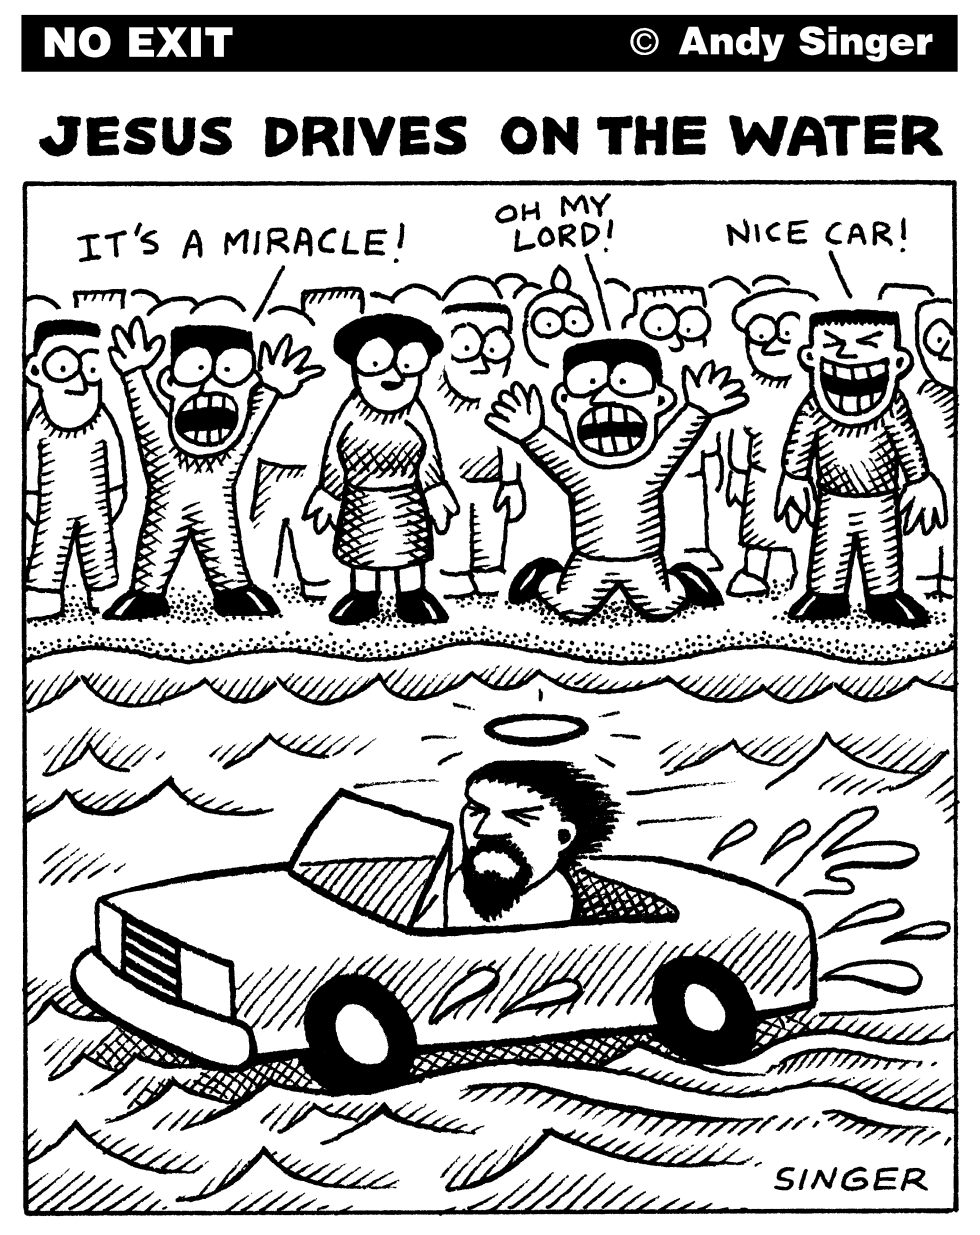 JESUS DRIVES ON THE WATER by Andy Singer